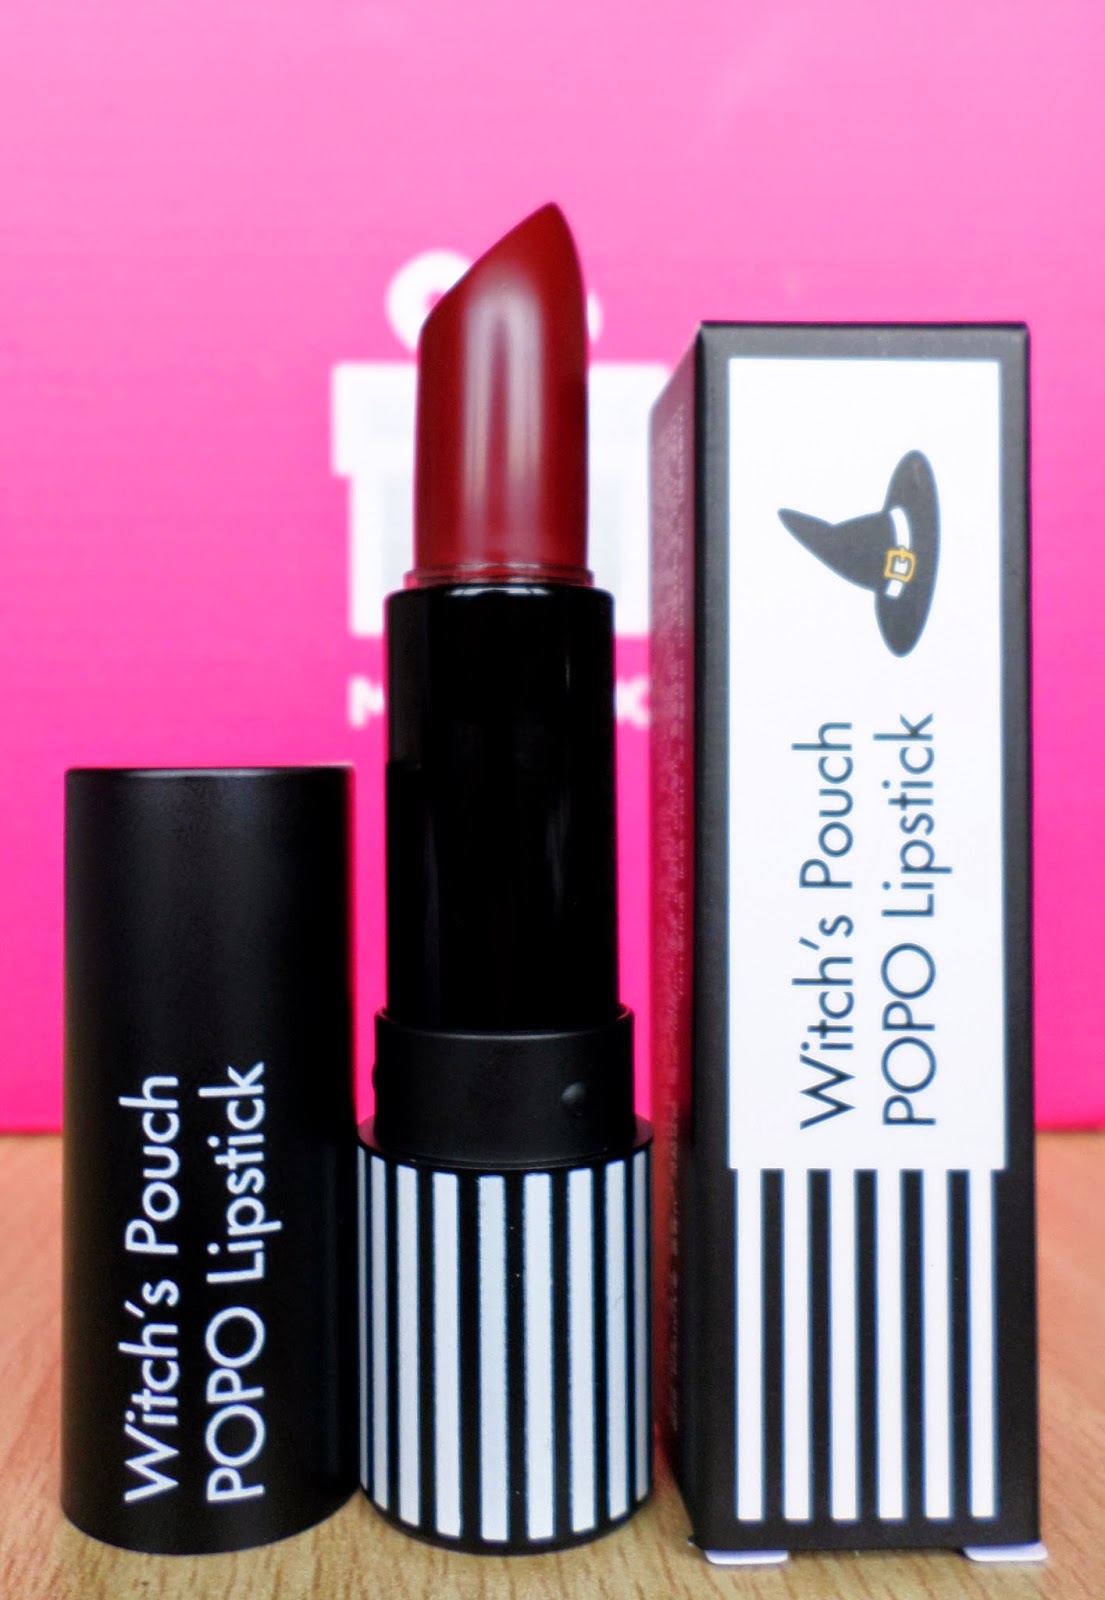 Witch's Pouch POPO Lipstick Burgundy Wine 19g rrp $12 Bullet